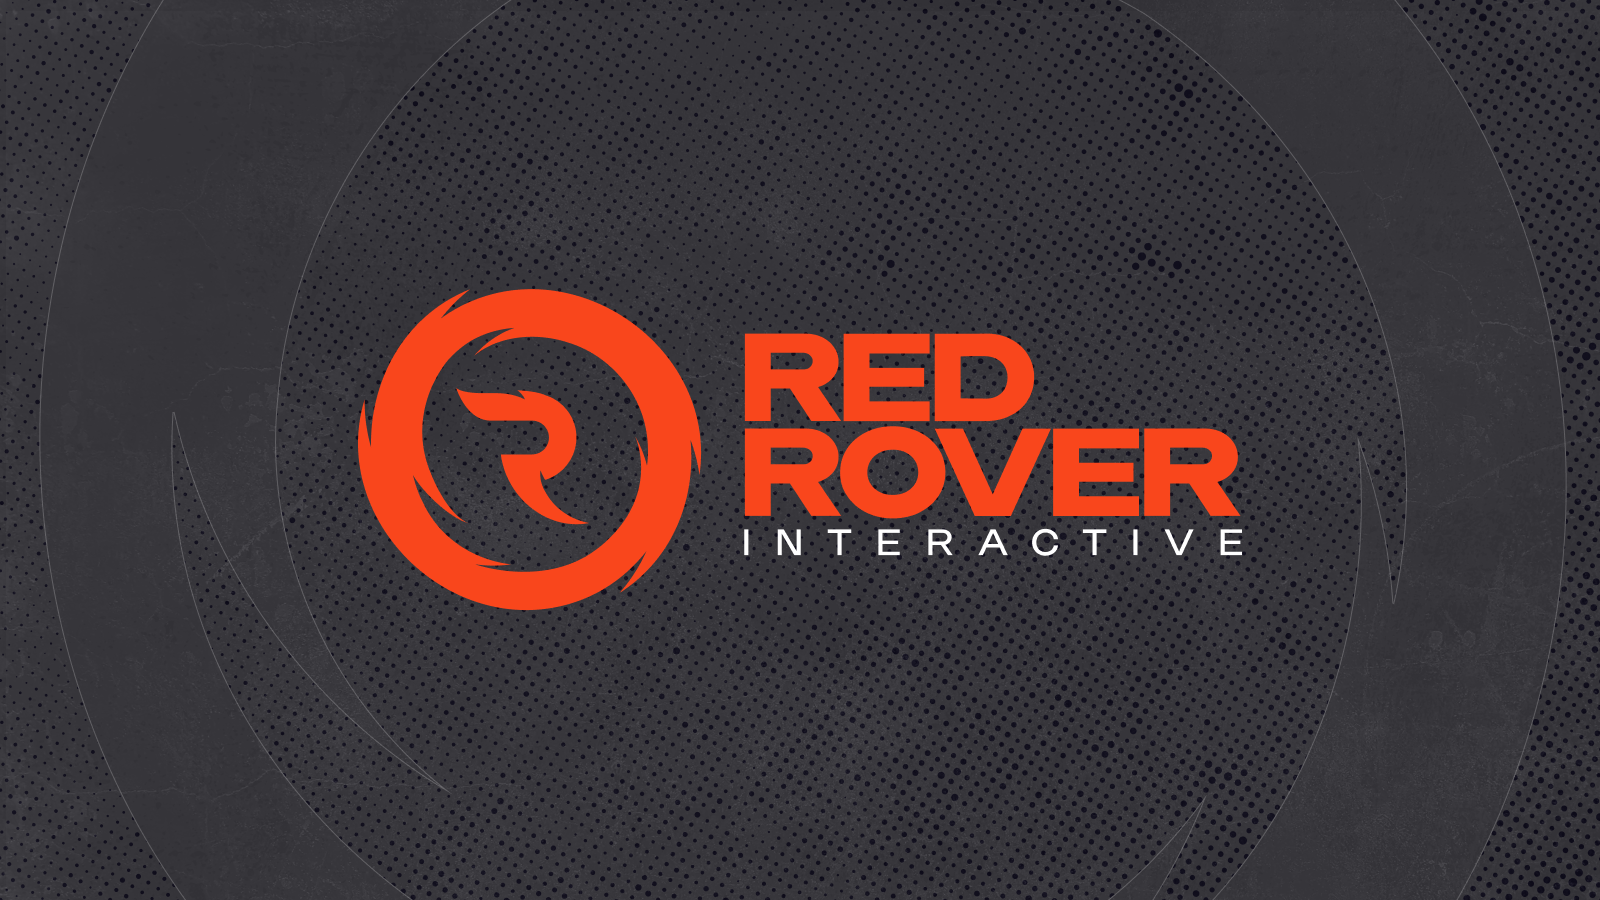 PUBG maker Krafton leads $15M investment in to UK studio Red Rover
Interactive